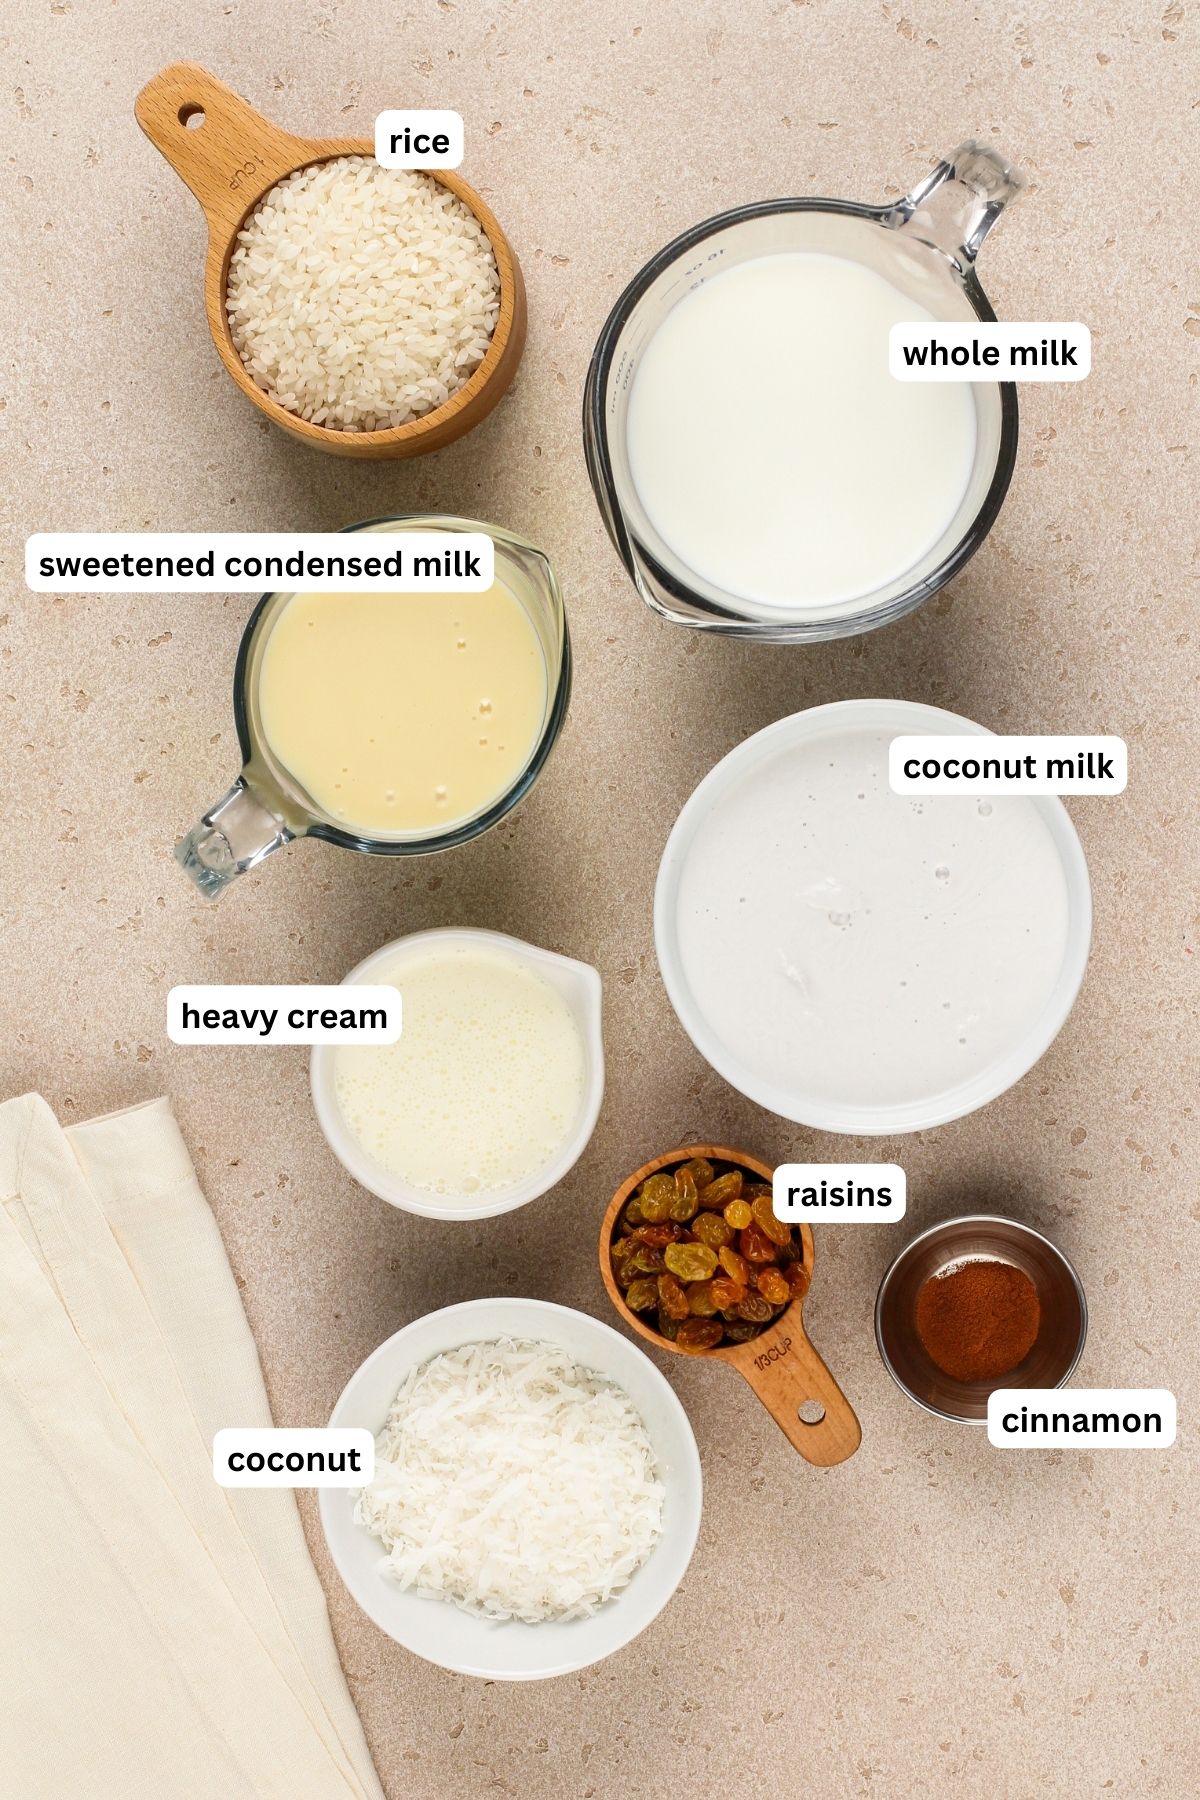 Coconut rice pudding recipe ingredients arranged in bowls. From top to bottom: rice, whole milk, sweetened condensed milk, coconut milk, heavy cream, raisins, cinnamon and shredded coconut.